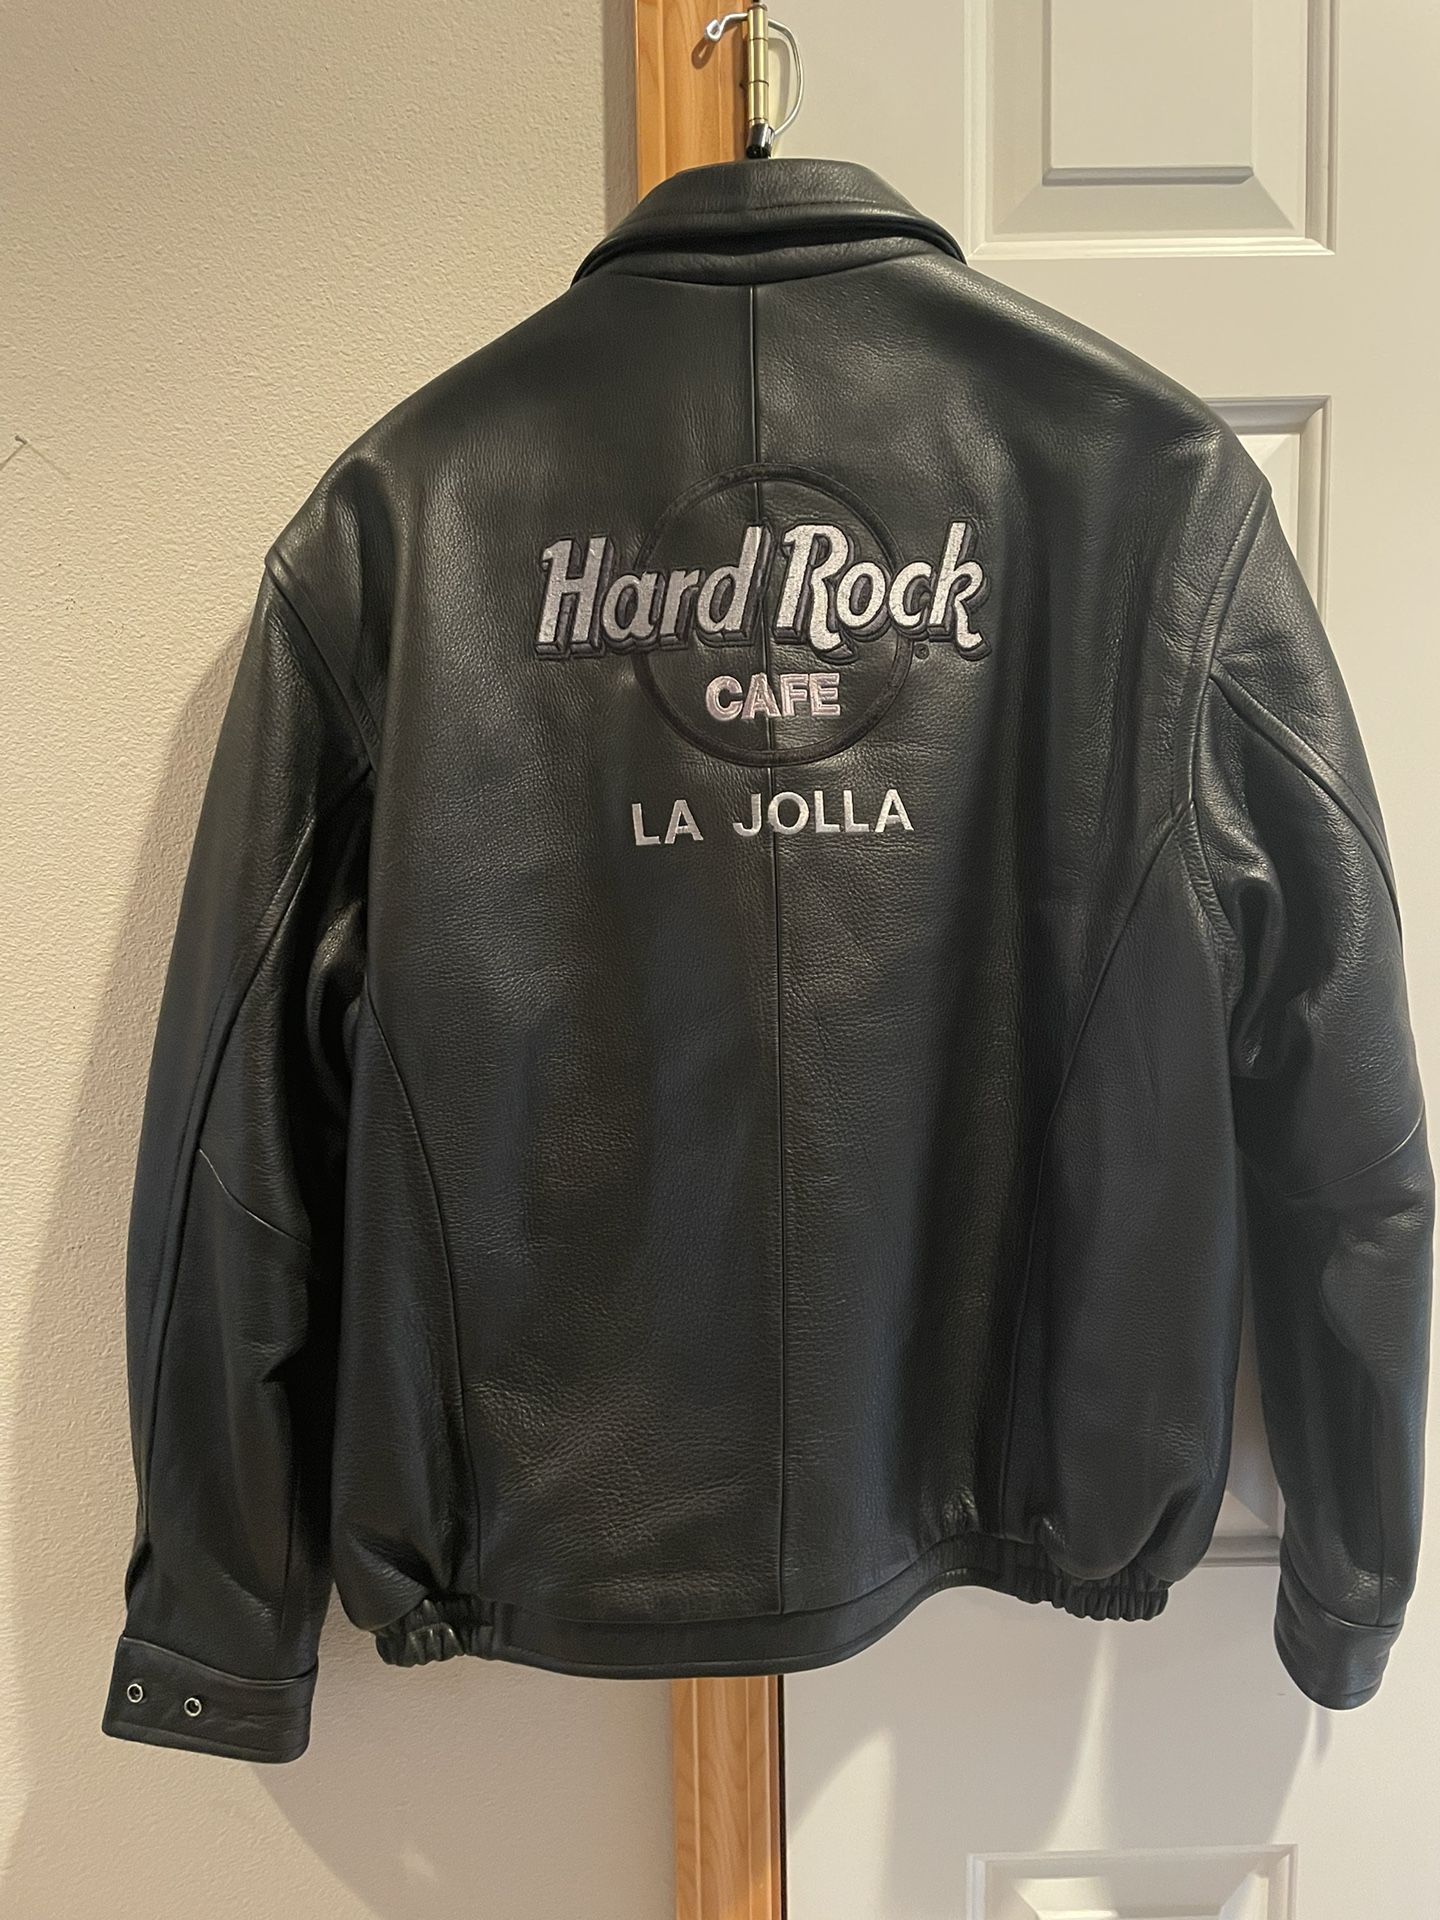 Hard Rock leather Bomber Jacket in mint condition - Size Large